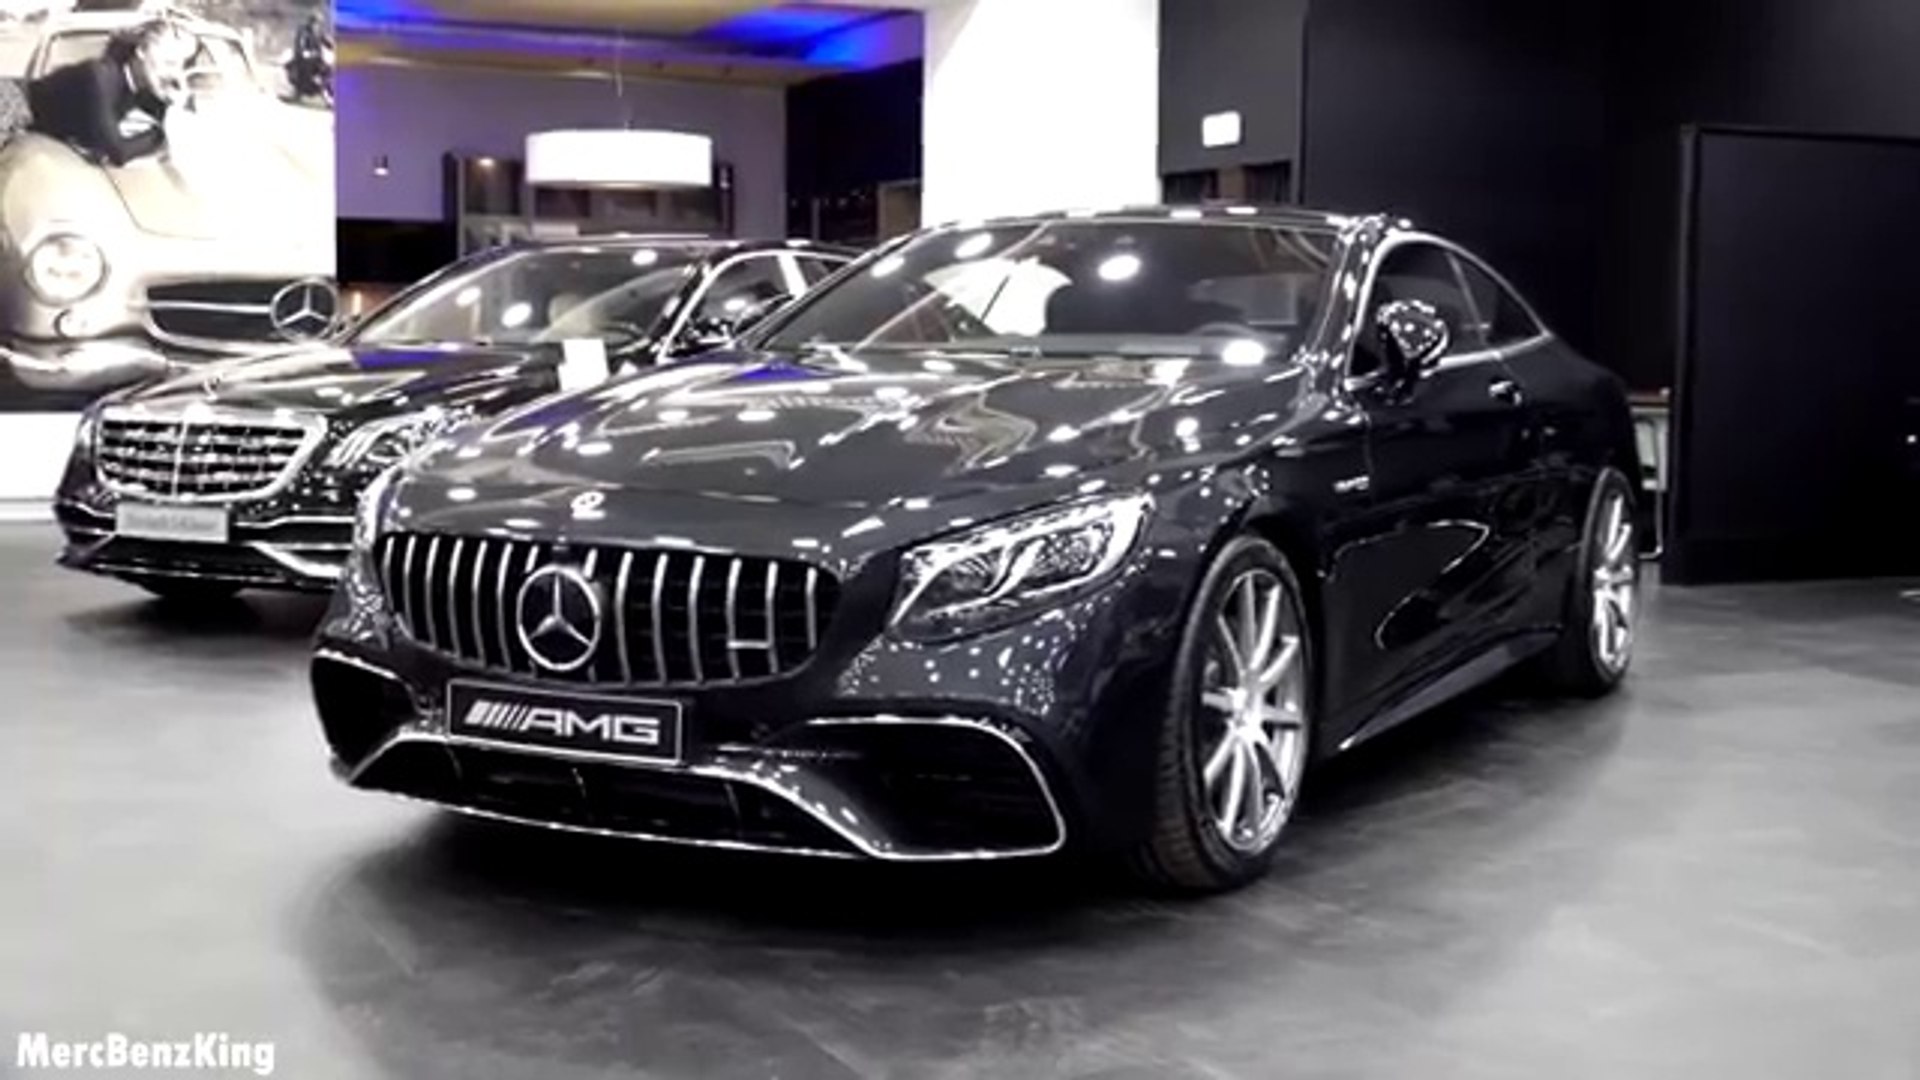 2018 Mercedes S Class Coupe New Full Review Amg S63 4matic Interior Exterior 2 Mercedeez S Class Latest 2018 Mercedees S Class Up Coming Mercedeez S Class Latest 2018 Mercedeez S Class Amg